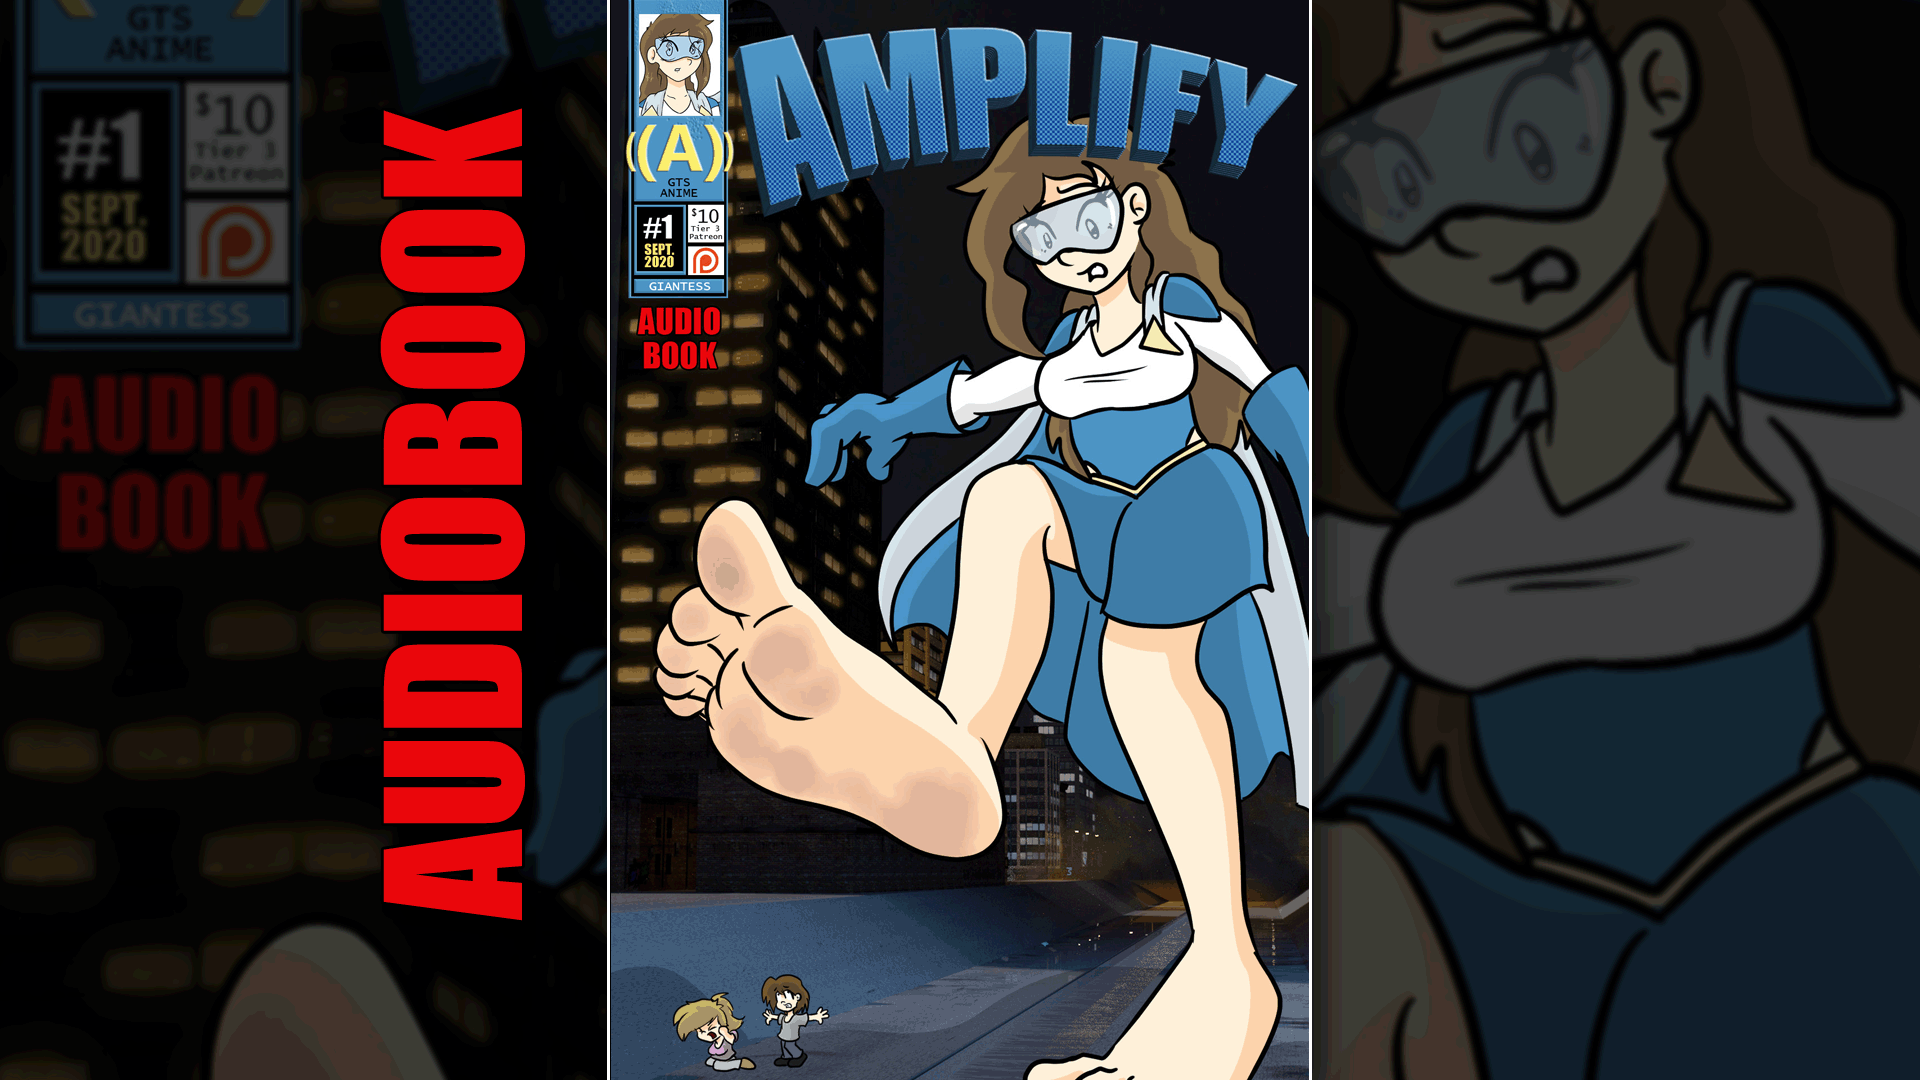 Amplify is a superhero with the power to enhance the abilities of others. When a group of villains attack, she's not only hit with something that makes her grow... but she has no control over her body! Mind controlled and becoming gigantic, sweet and innocent hero Amplify finds herself stomping into the crowded city. A masterfully acted story starring Eclipse and probably one of, if not the best audiobook we've produced. Her incredible role as the unwilling gentle giantess forced to commit horrible acts is incredible! You'll adore this audio only story. Also available on Patreon.com/DarkainArts at the $10 tier!